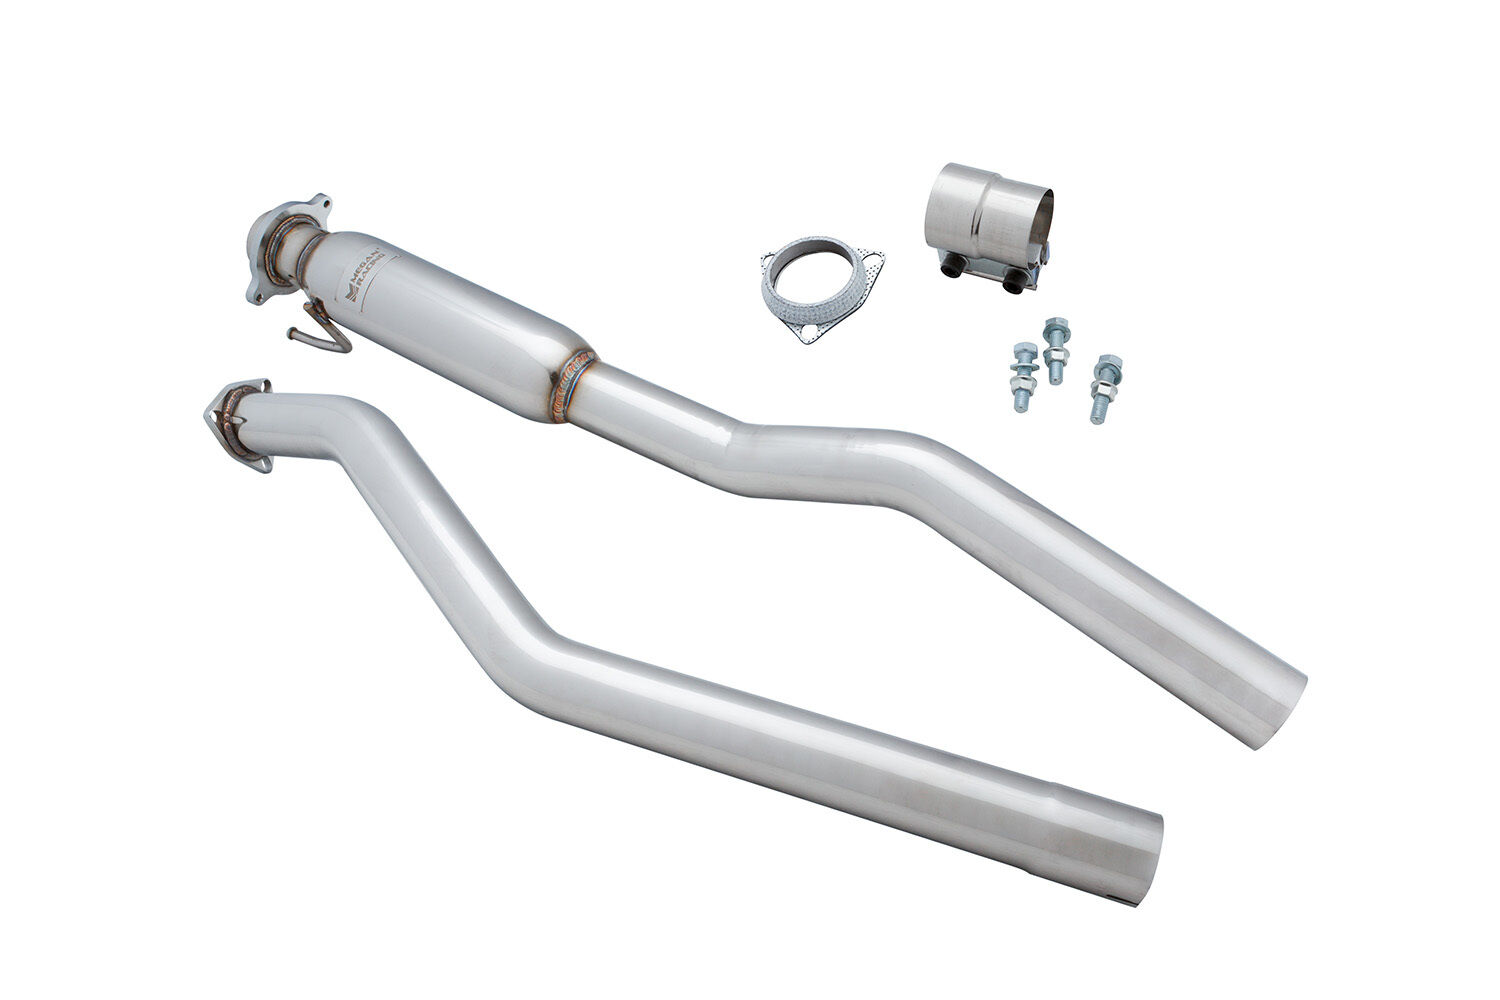 MEGAN EXHAUST MIDDLE MID PIPE MIDPIPE FOR 02-05 HONDA CIVIC Si 3DR EP3 K20A3